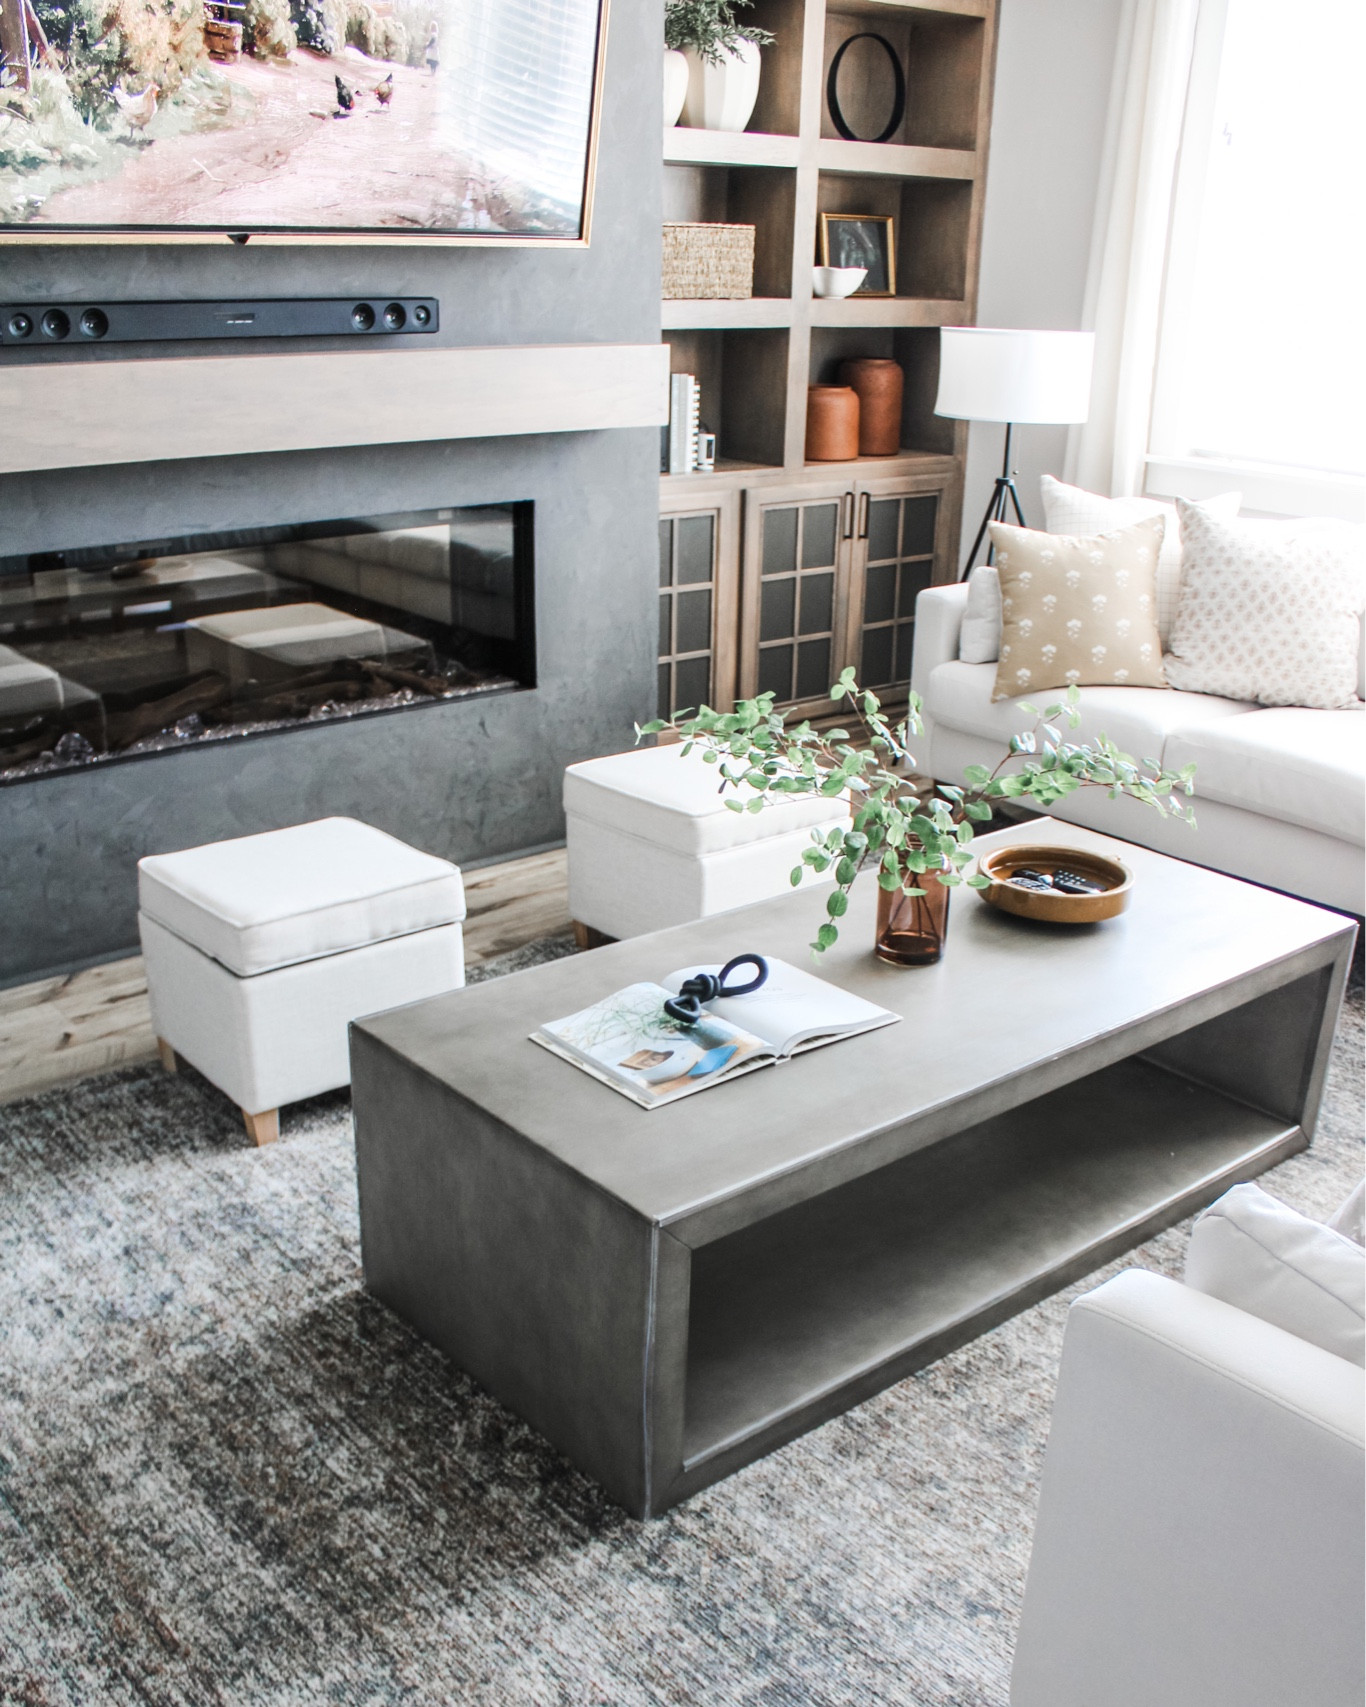 Fireplace with Black Coffee Table Books and Driftwood - Transitional -  Living Room